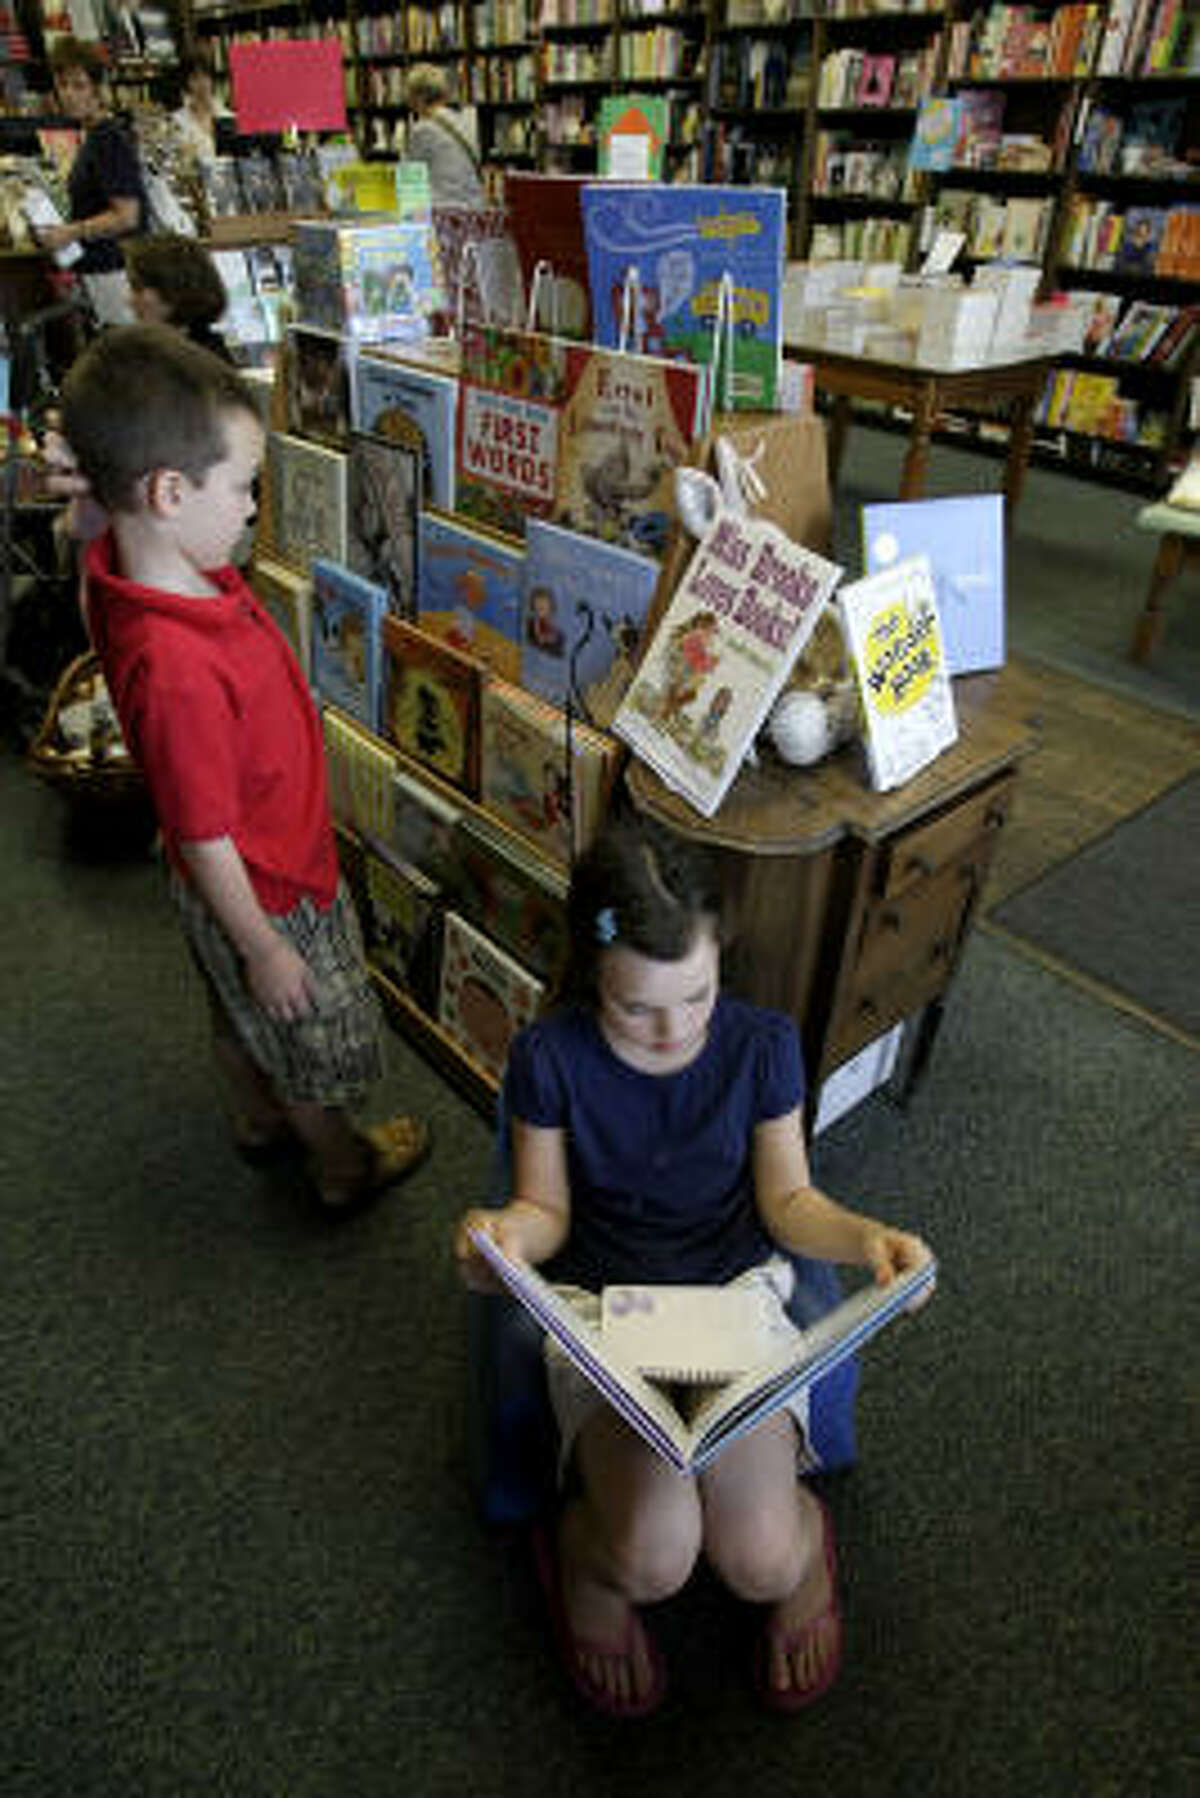 Kiley Hatch, 9, and her brother John Austin Hatch, 7, spend some time at the west Memorial area's Blue Willow Bookshop, which is having a strong year.